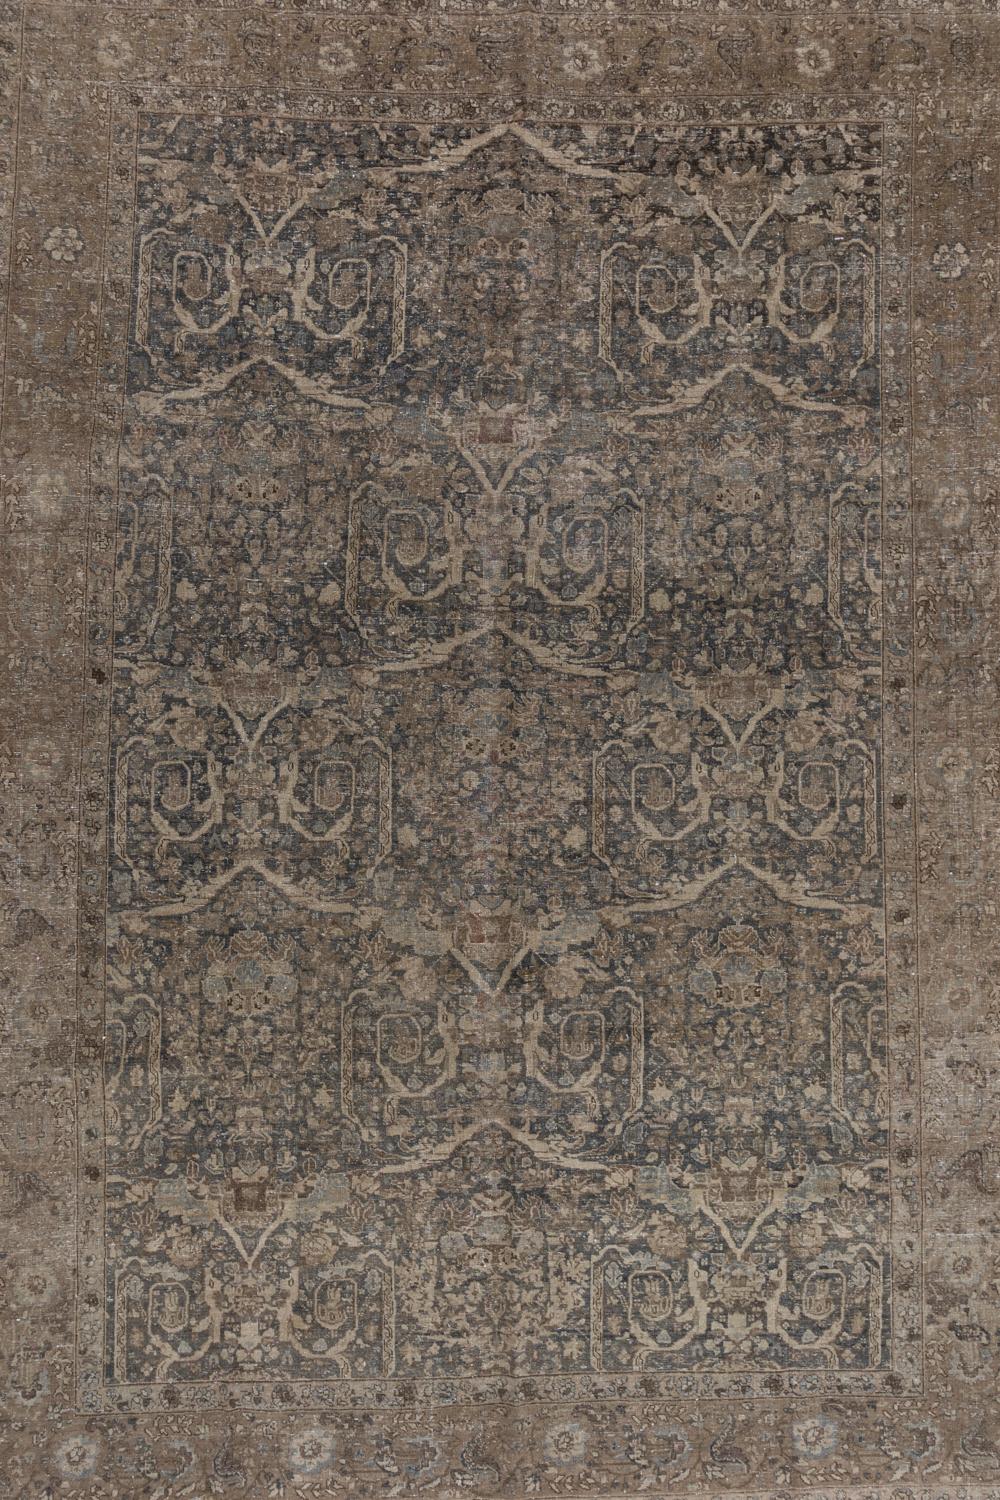 Age: 1910

Pile: Low

Wear Notes: 3

Material: Wool on Cotton

Antique Persian rug with the desirable Mustafi pattern. 

Vintage rugs are made by hand over the course of months, sometimes years. Their imperfections and wear are evidence of